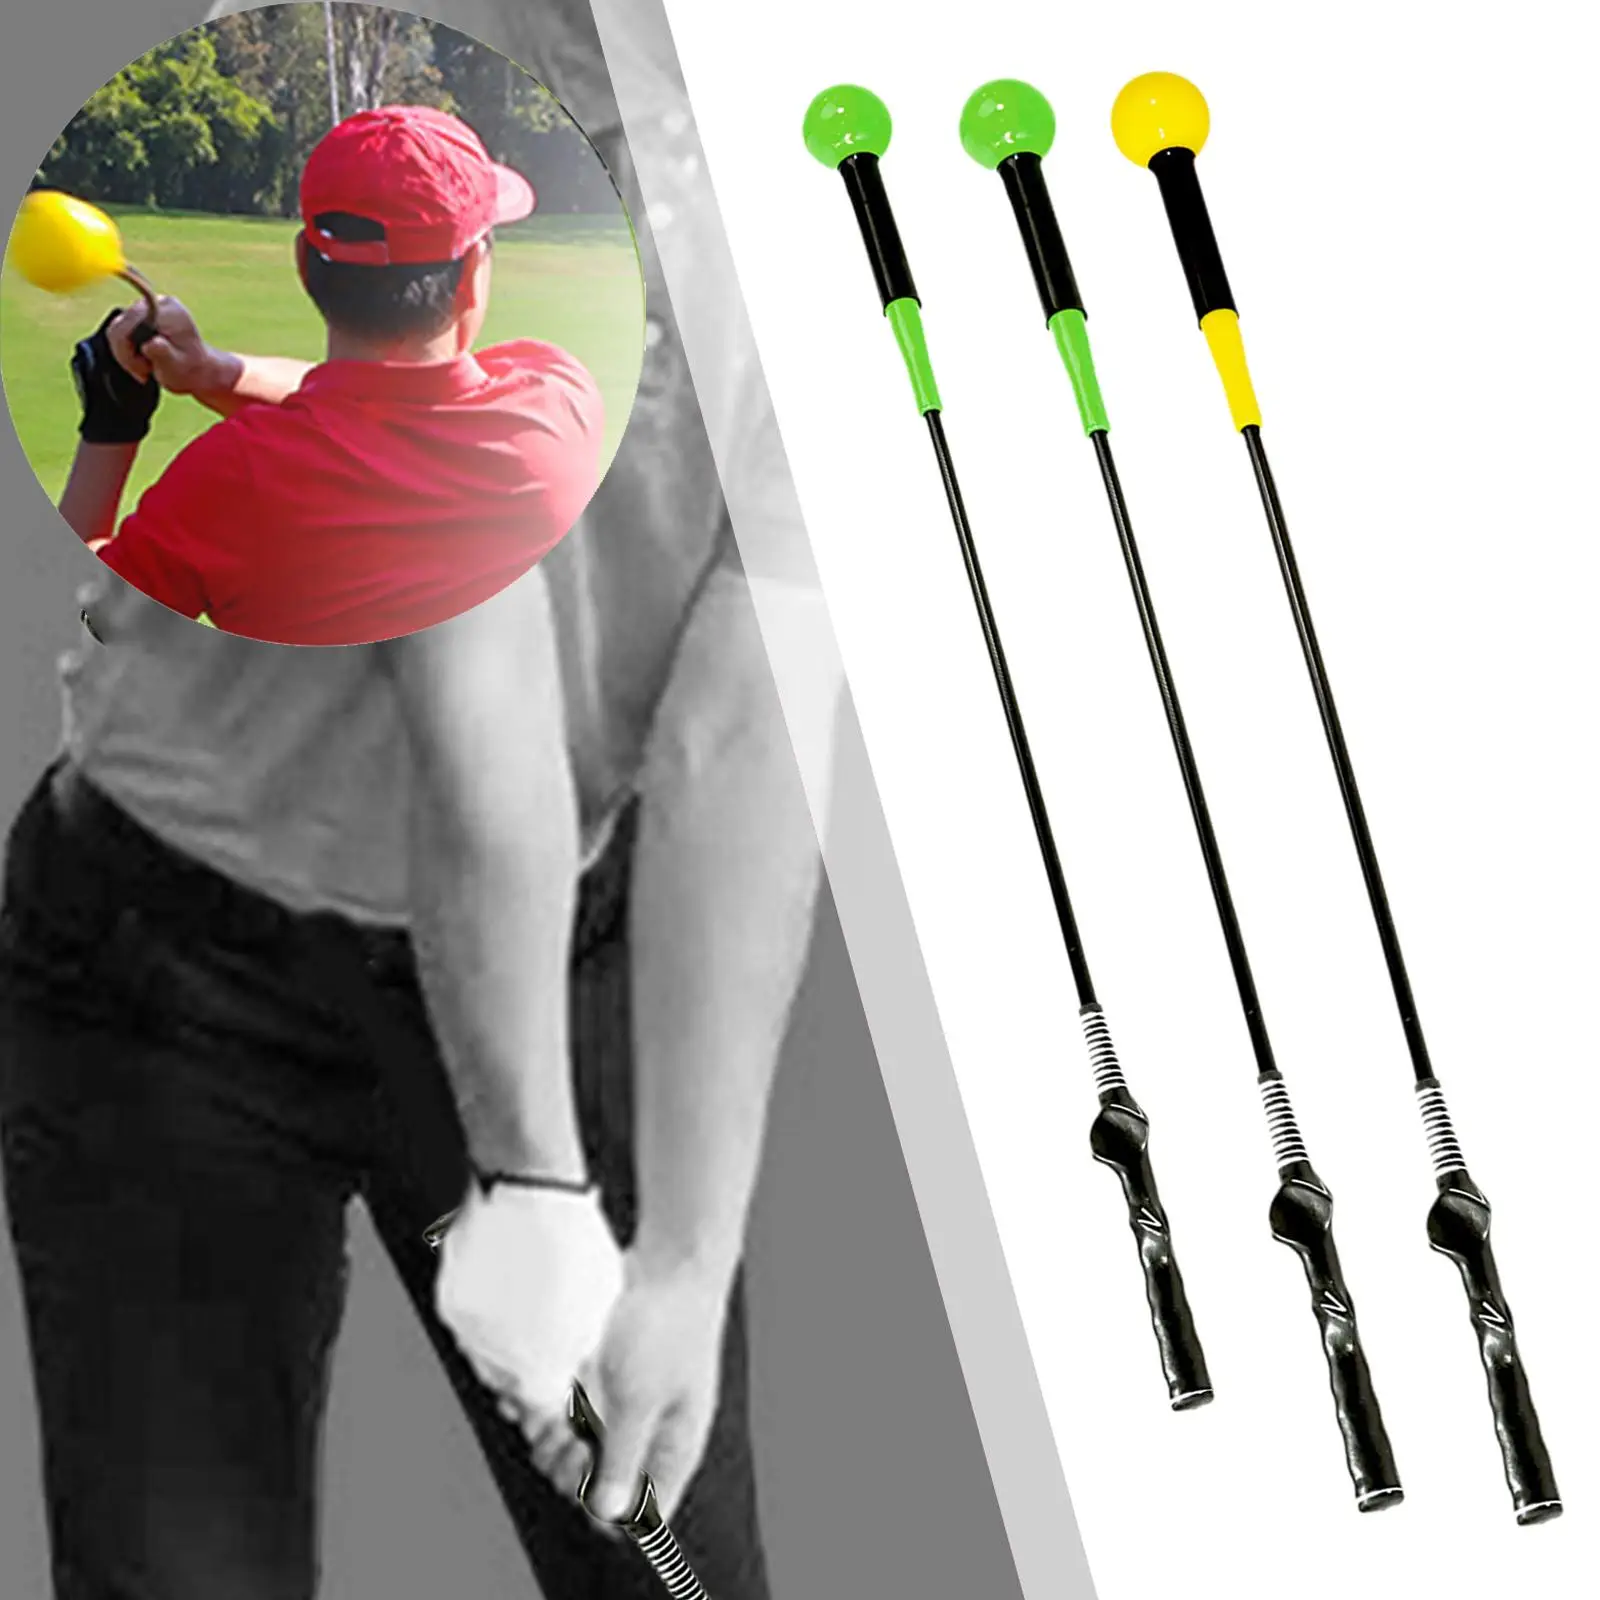 Golf Swing Trainer Golf Gifts for Men Women Golf Warm up for Chipping Tempo Balance Indoor Outdoor Practice Training